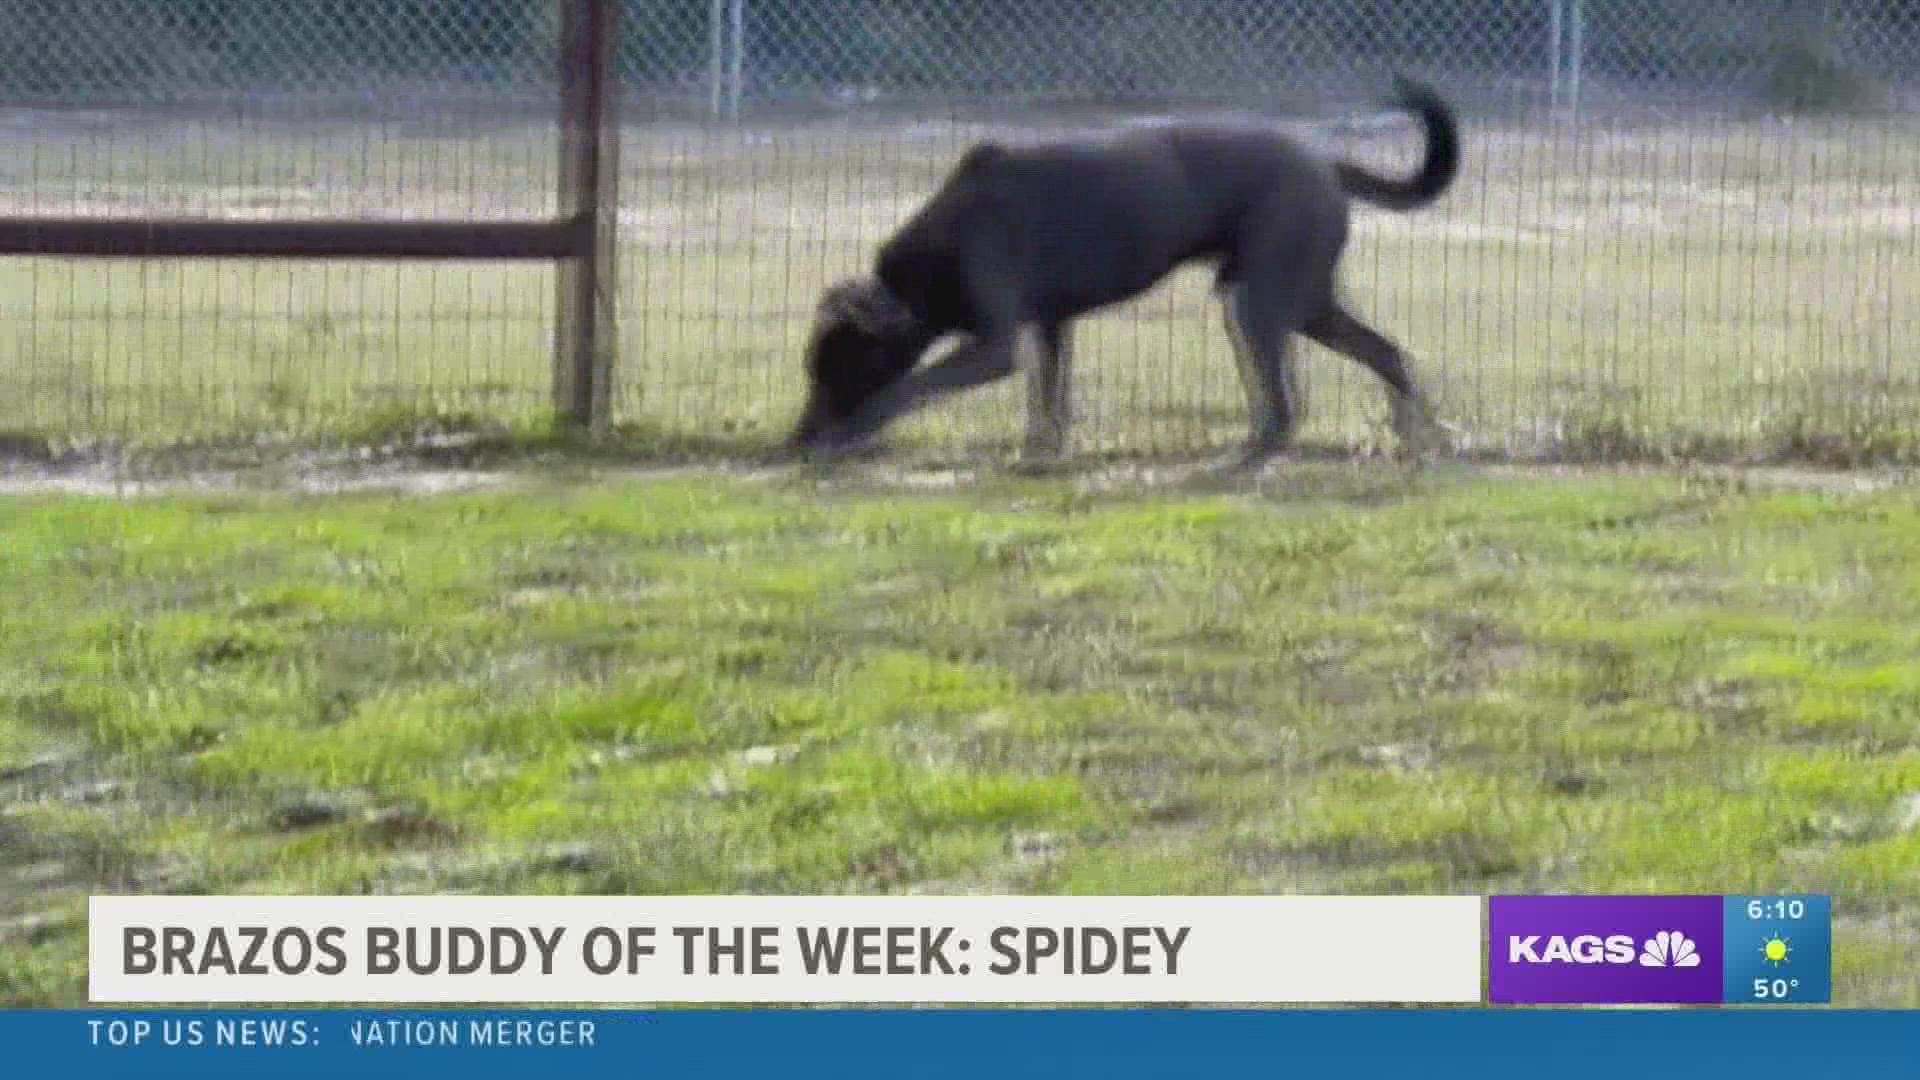 This week's featured Brazos Buddy is Spidey, a two-year-old Lacy mix that's looking for his forever home.